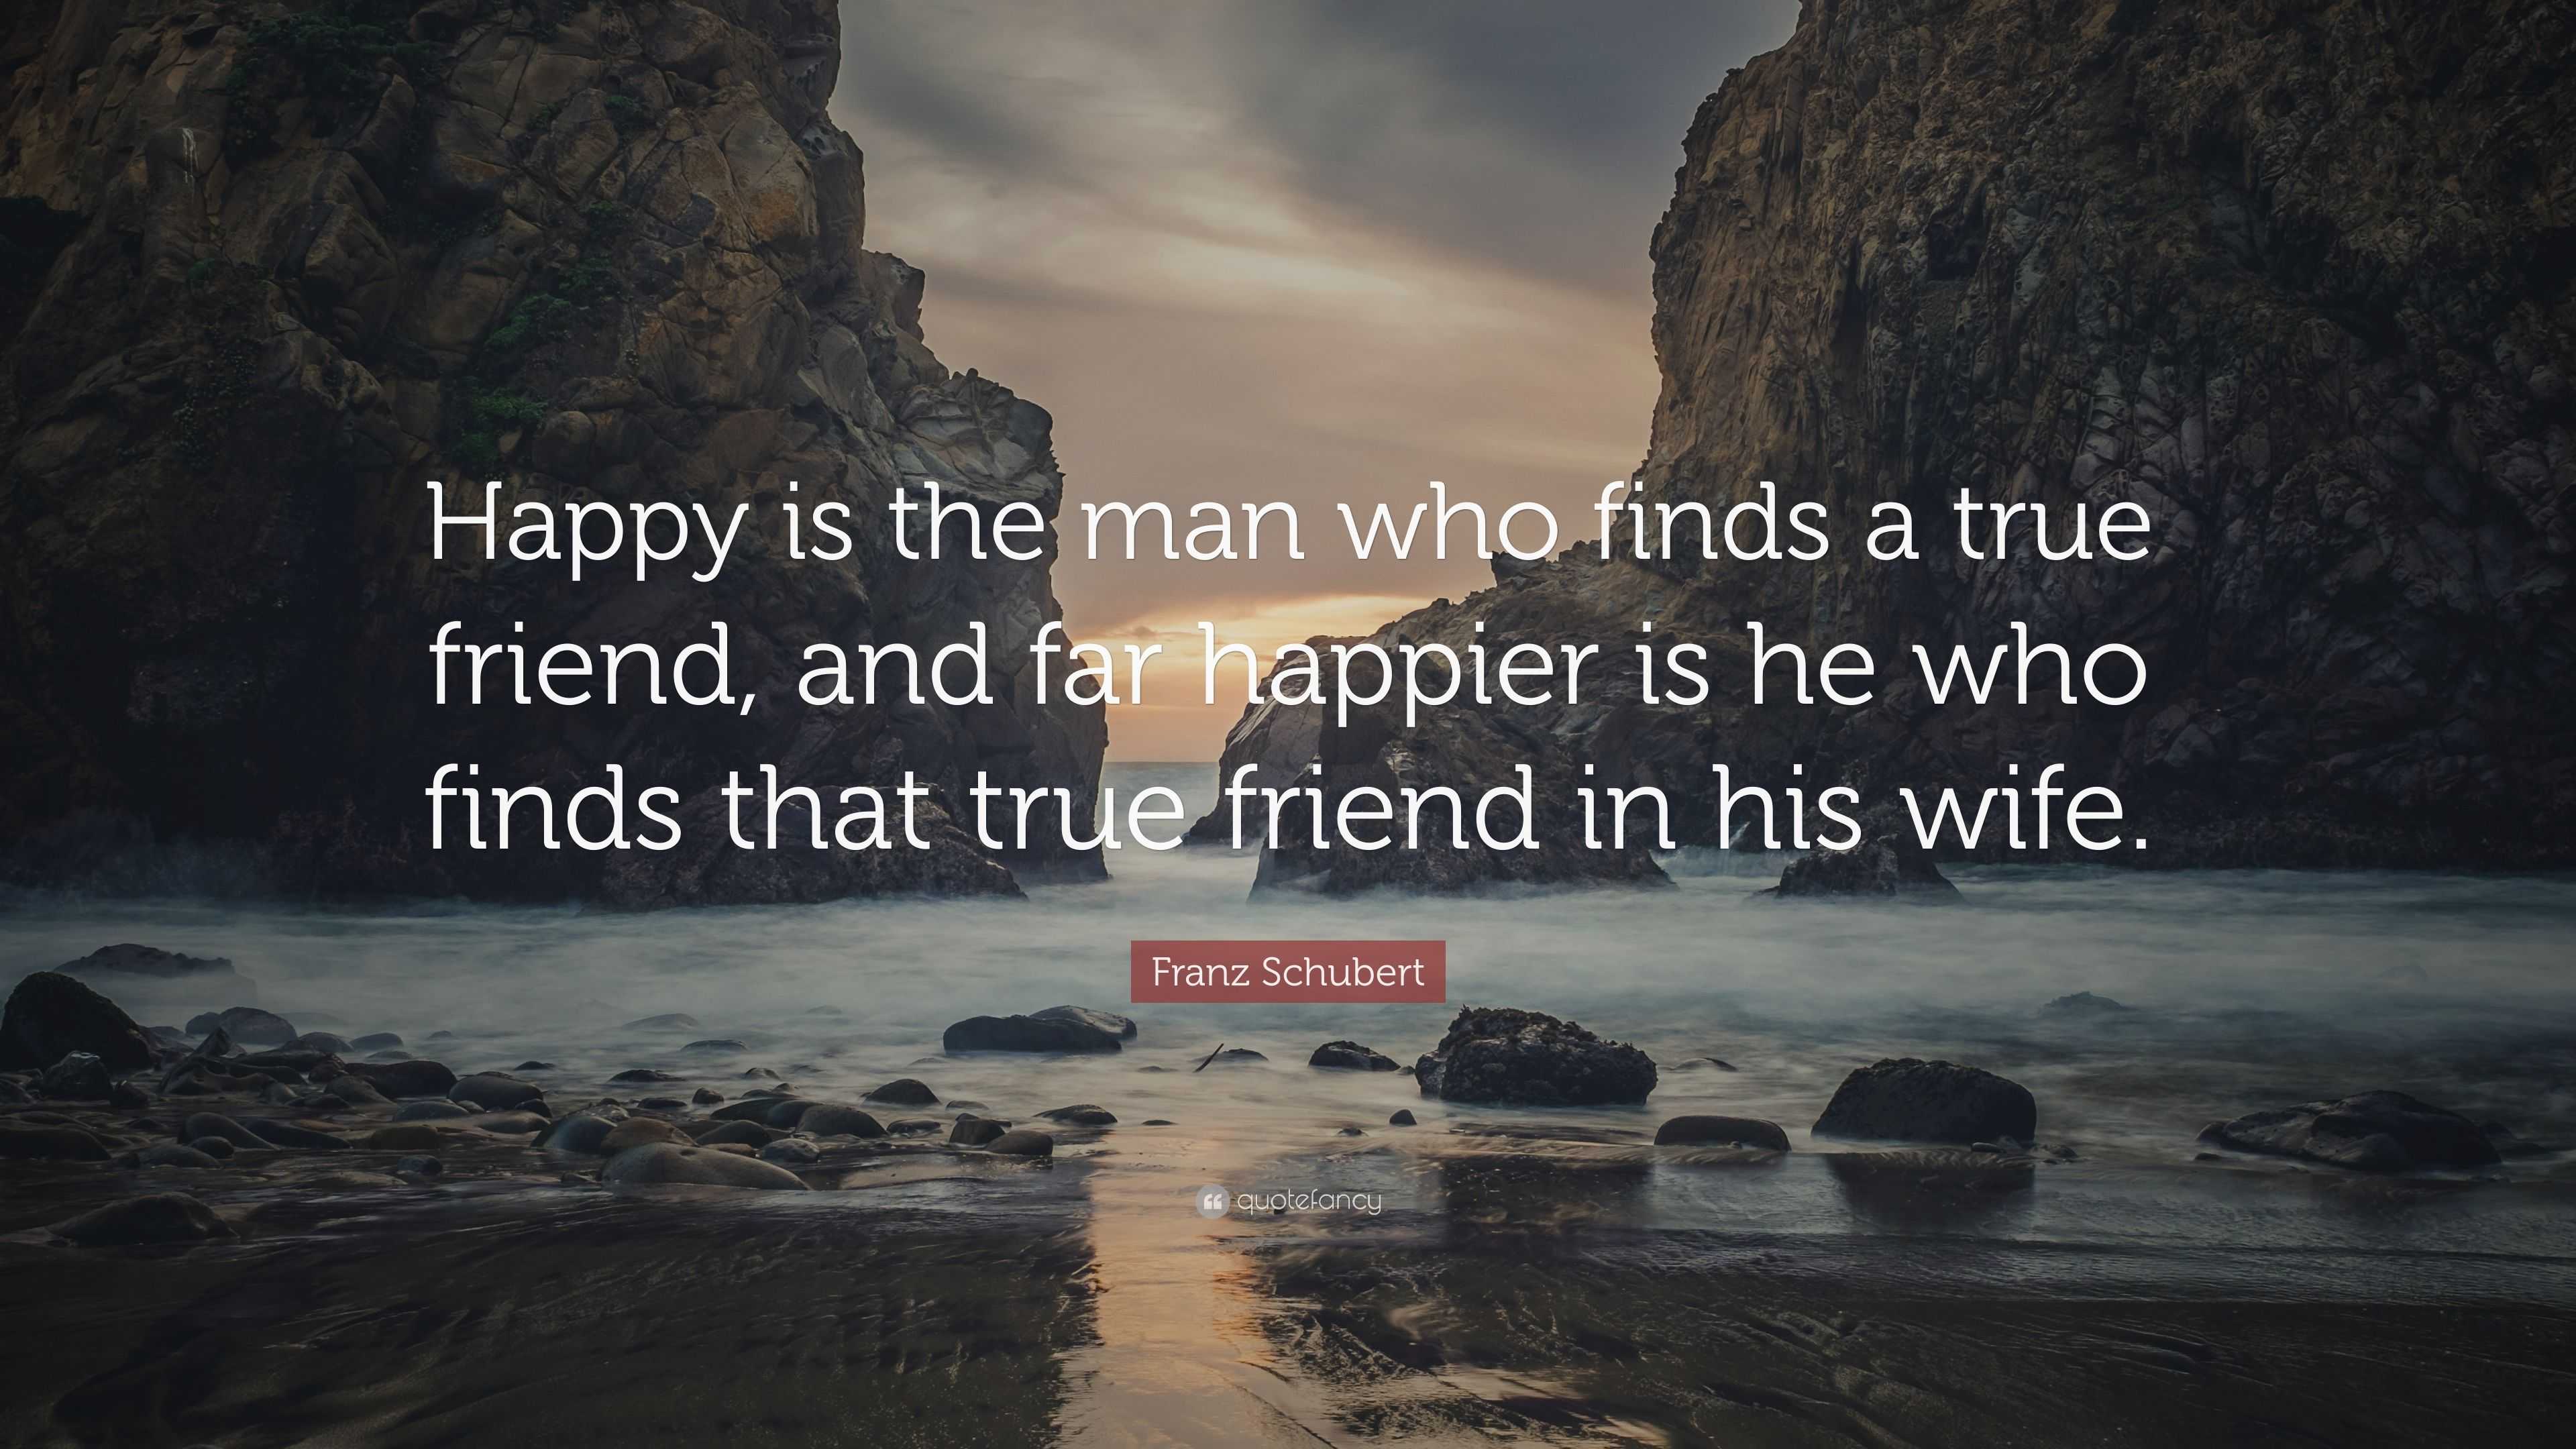 Blessed is the man who finds a true and enduring friend in his wife.”